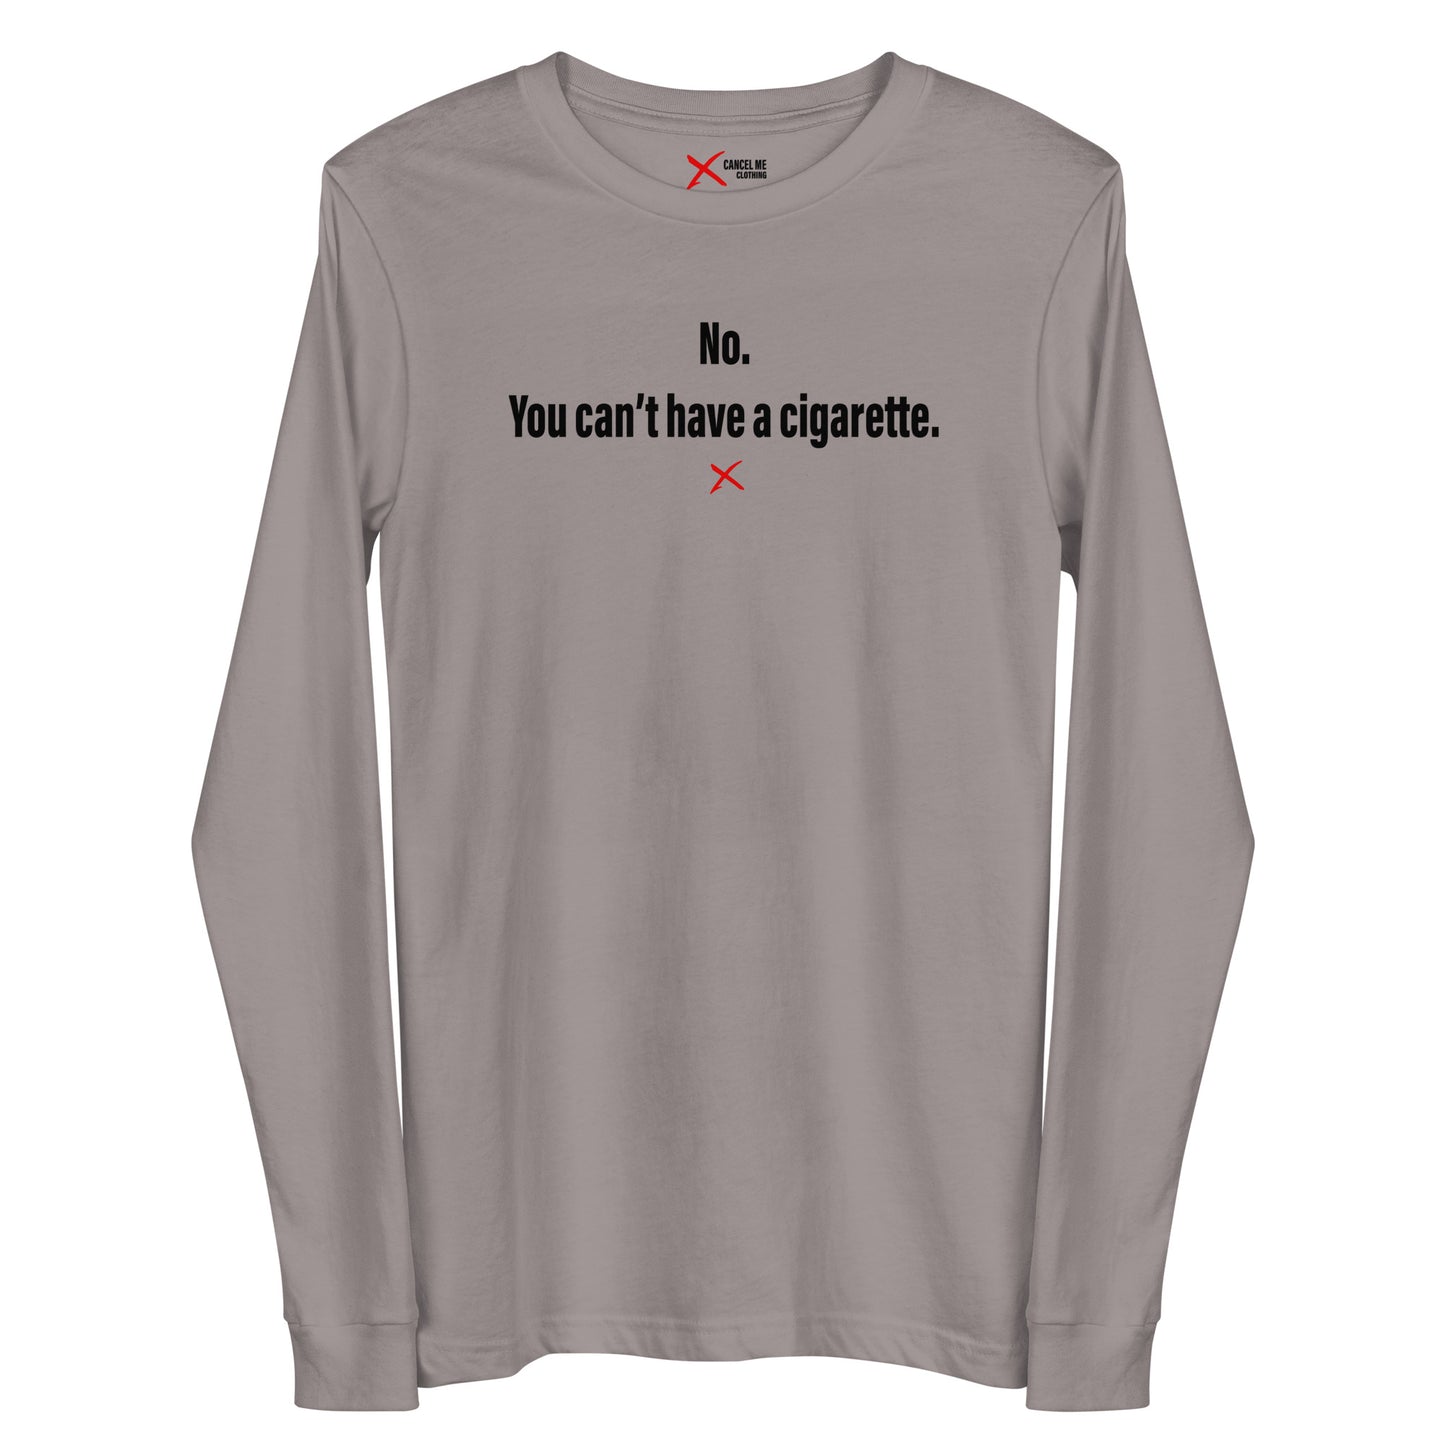 No. You can't have a cigarette. - Longsleeve